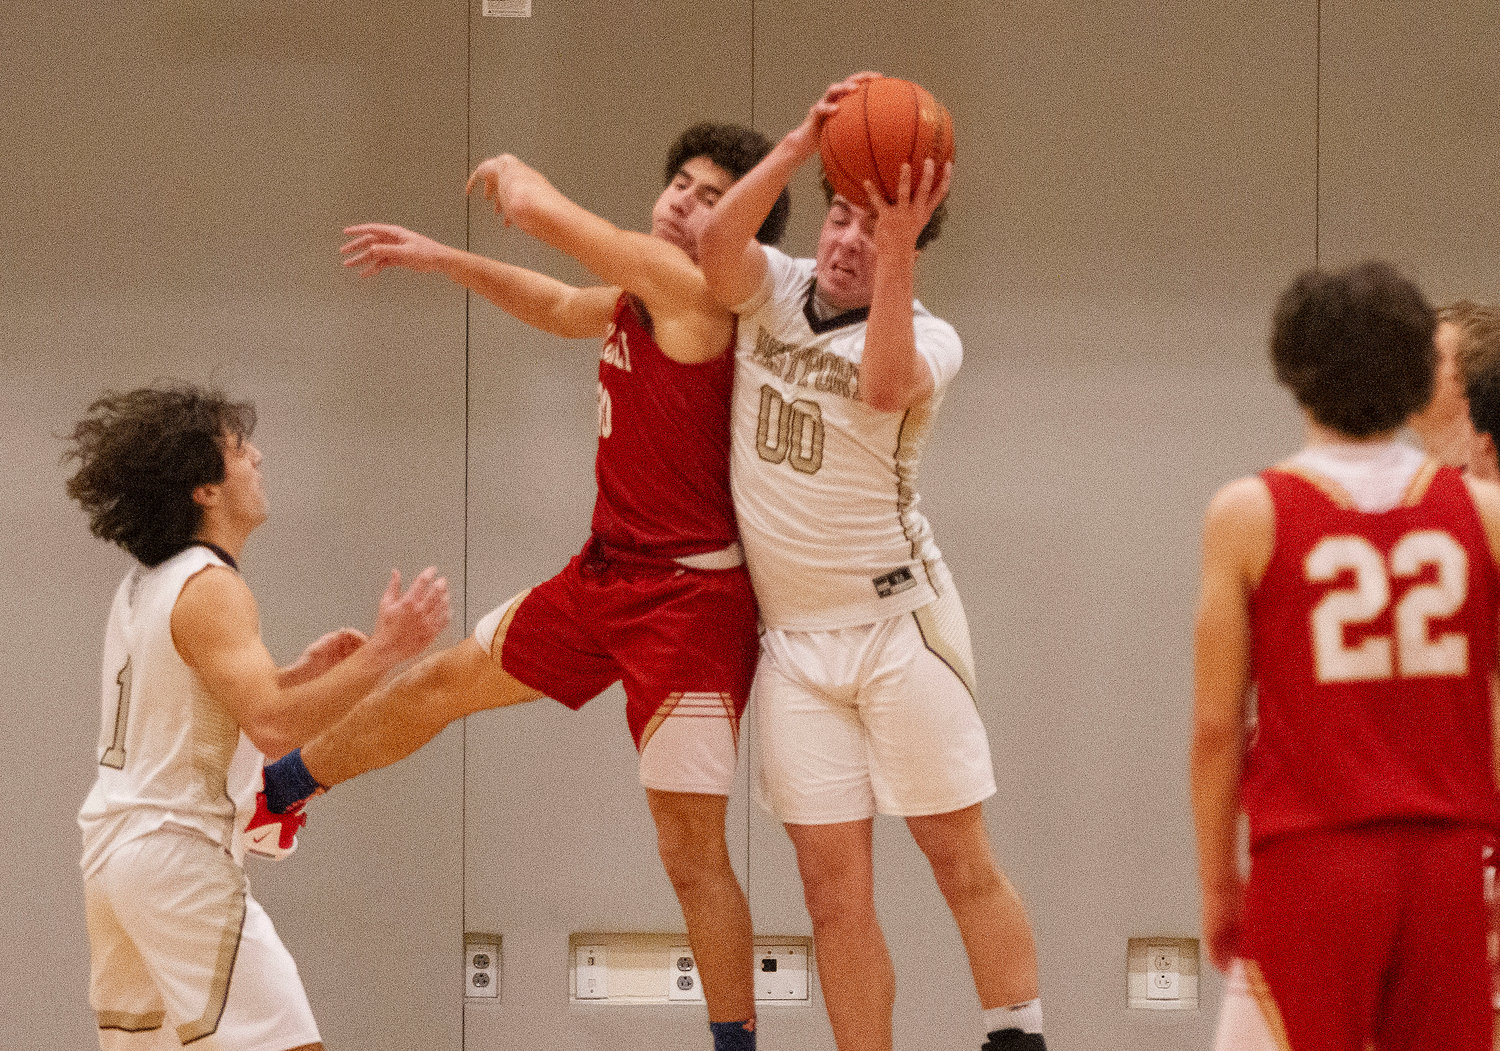 Max Morotti grabs a defensive rebound during the game. Morotti scored 17 points and brought down 8 rebounds during the game.